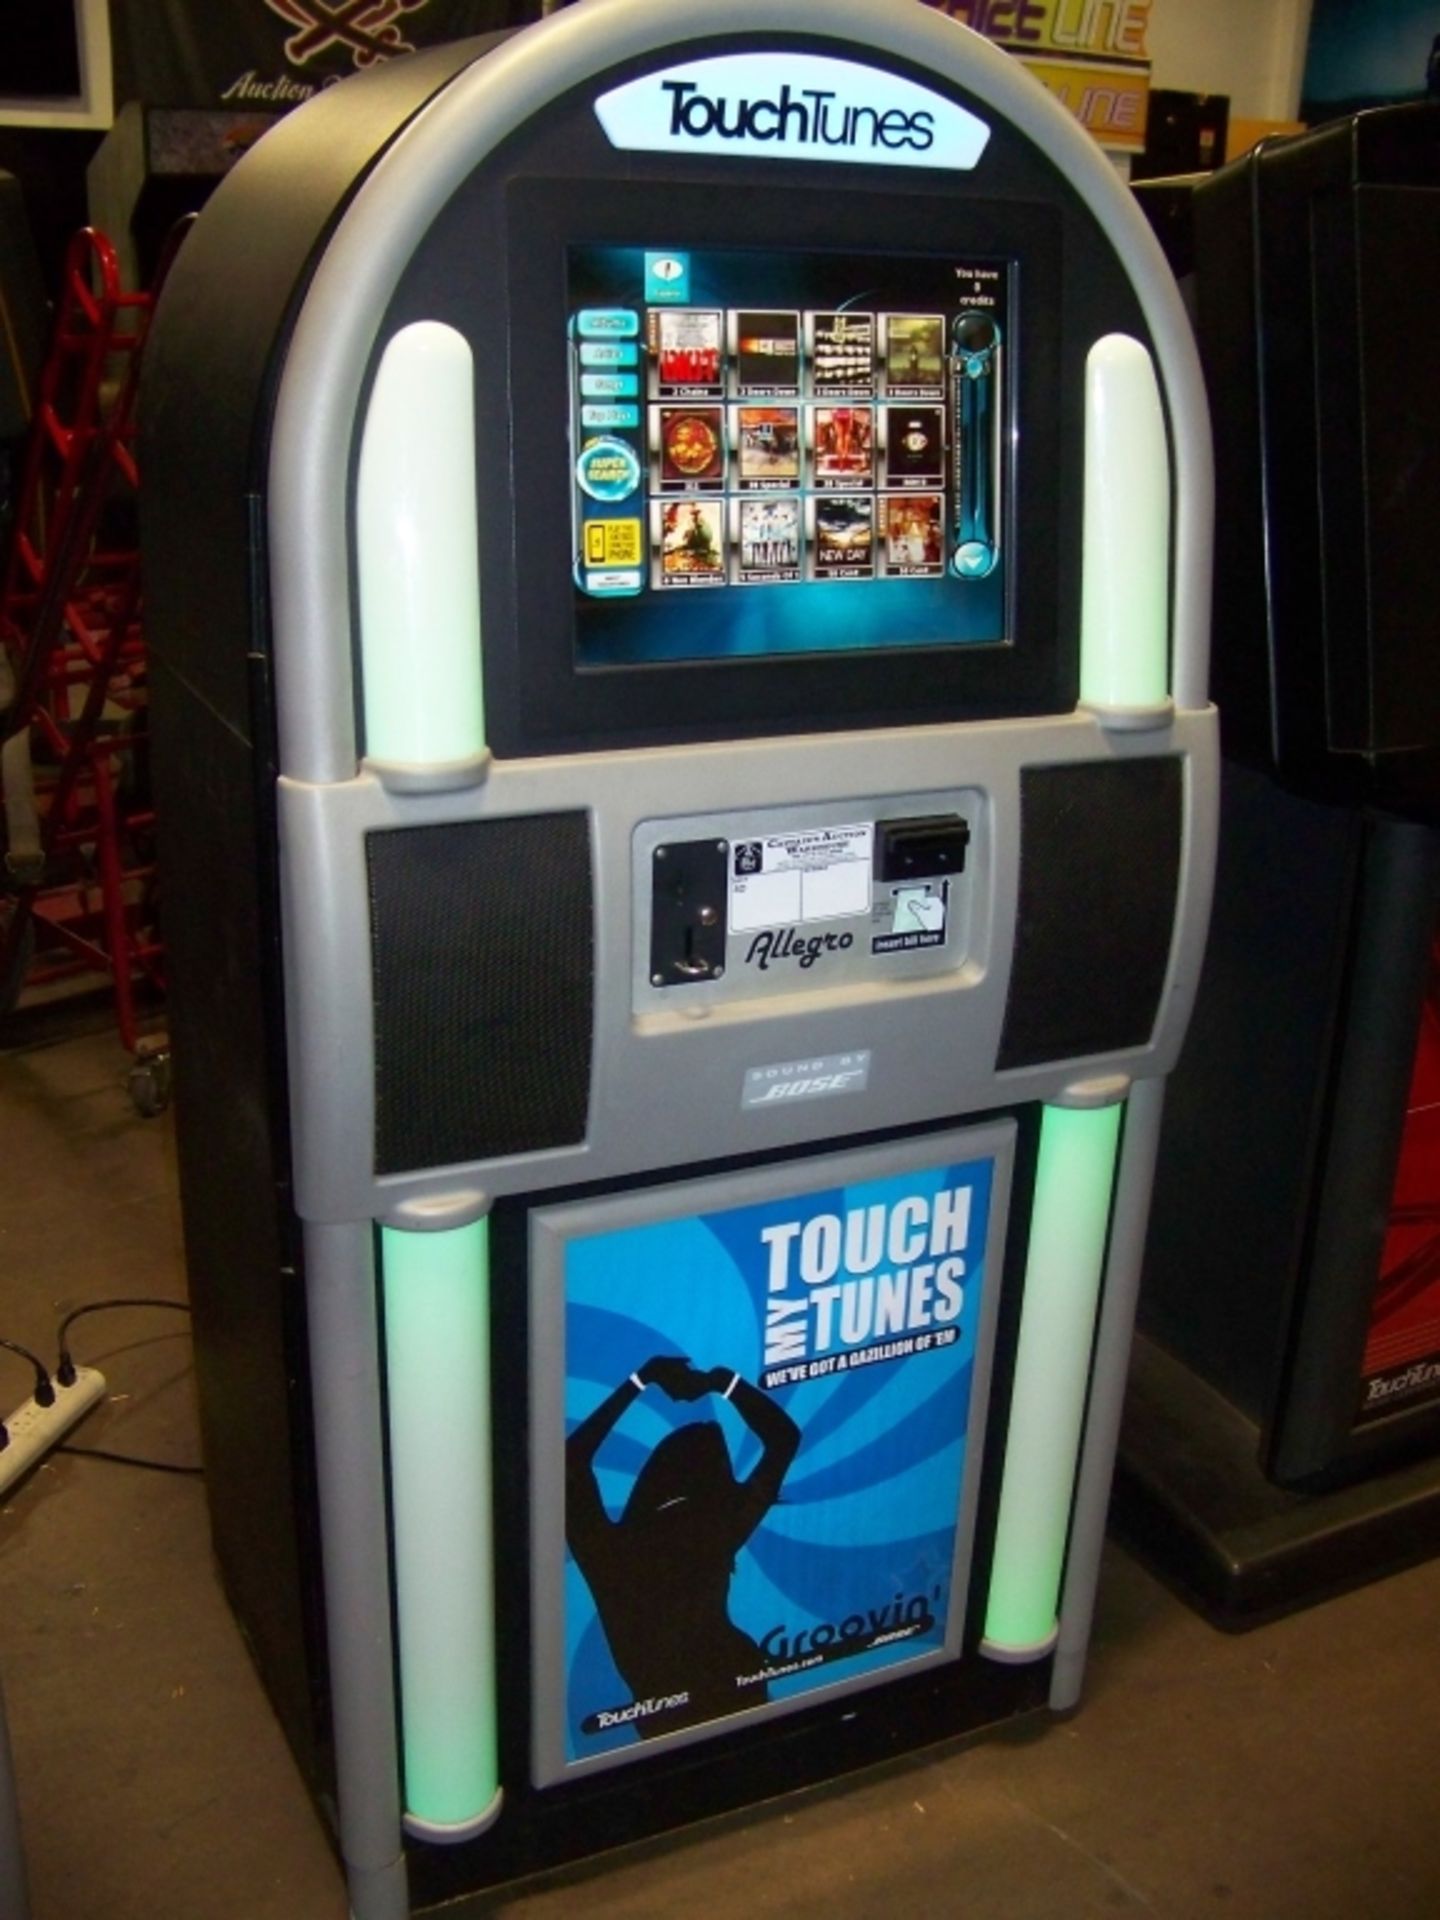 TOUCH TUNES ALLEGRO FLOOR MODEL DIGITAL JUKEBOX Item is in used condition. Evidence of wear and